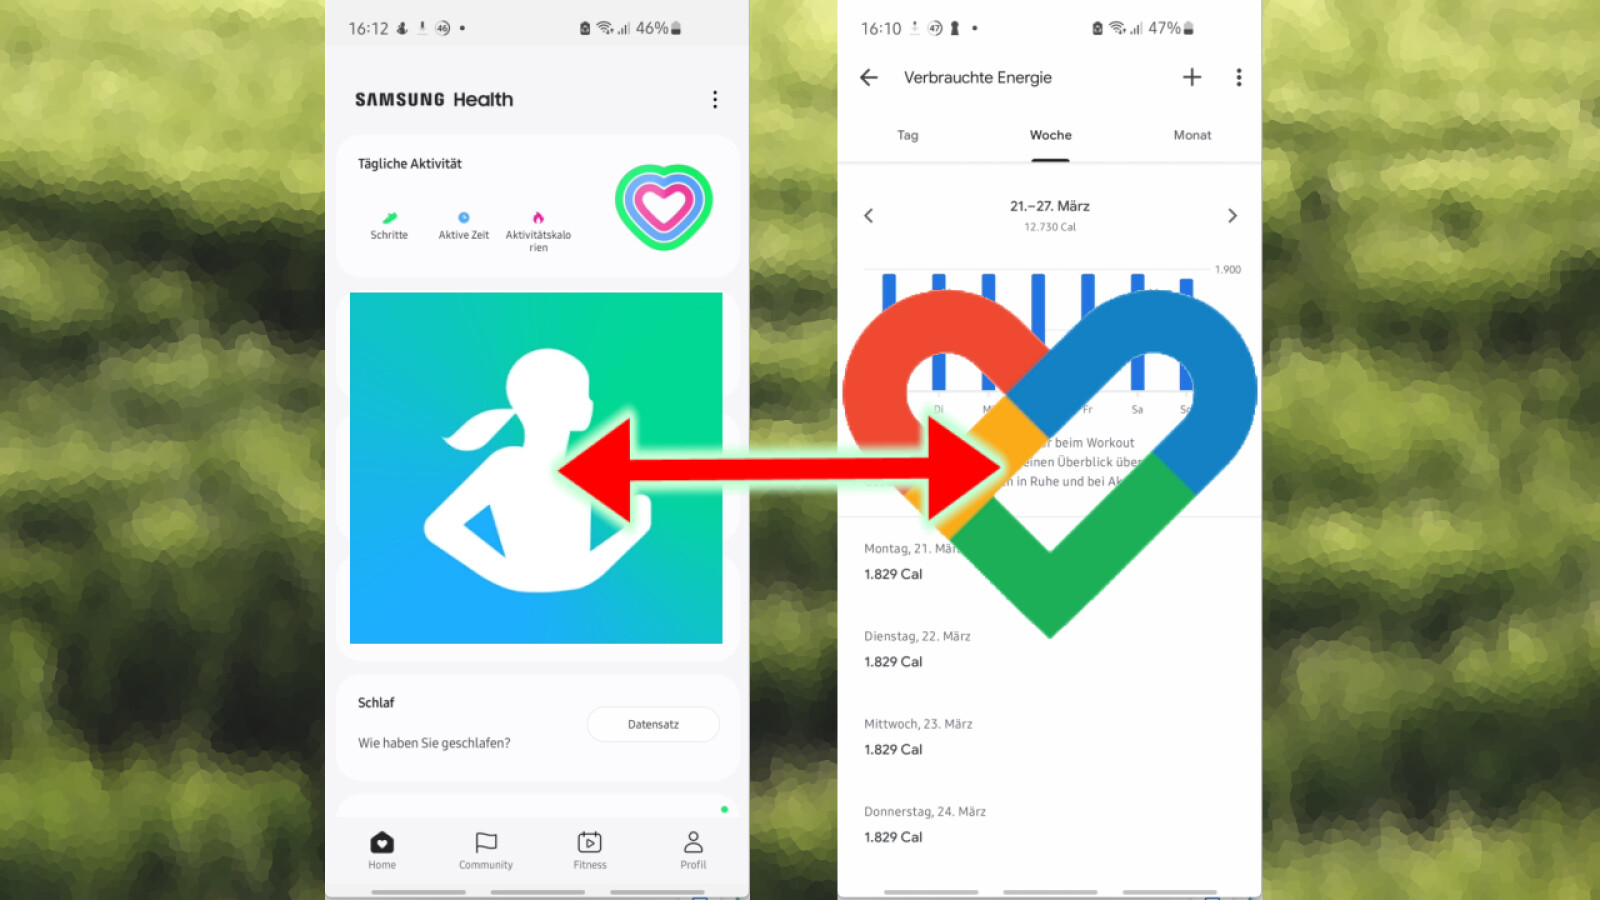 Samsung Health: How to connect the app to Google Fit